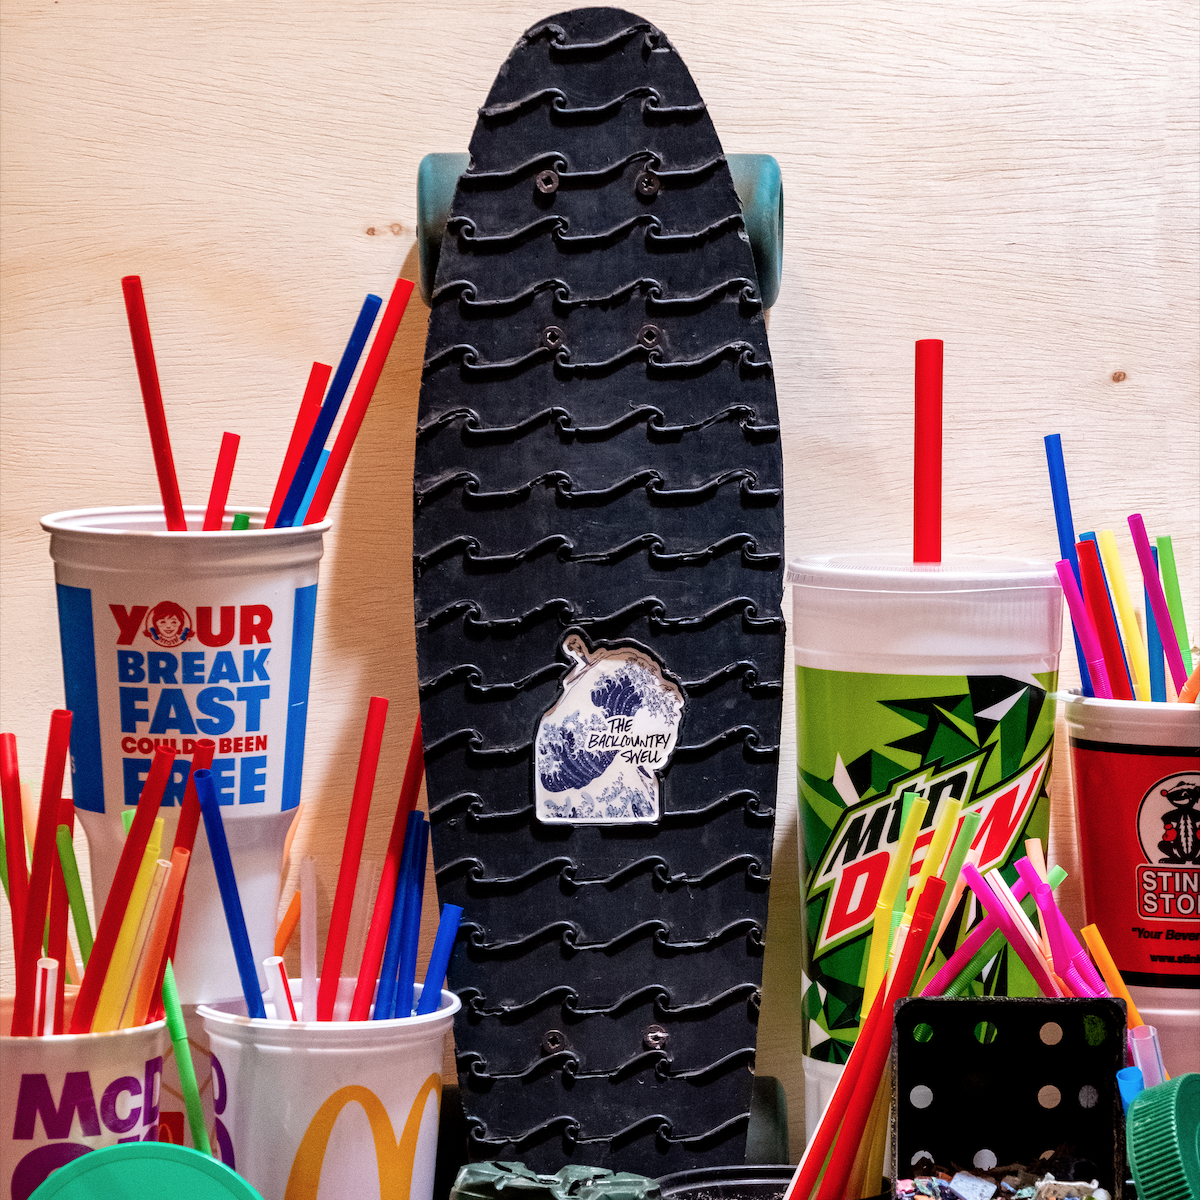 Plastic pollution with recycled skateboard